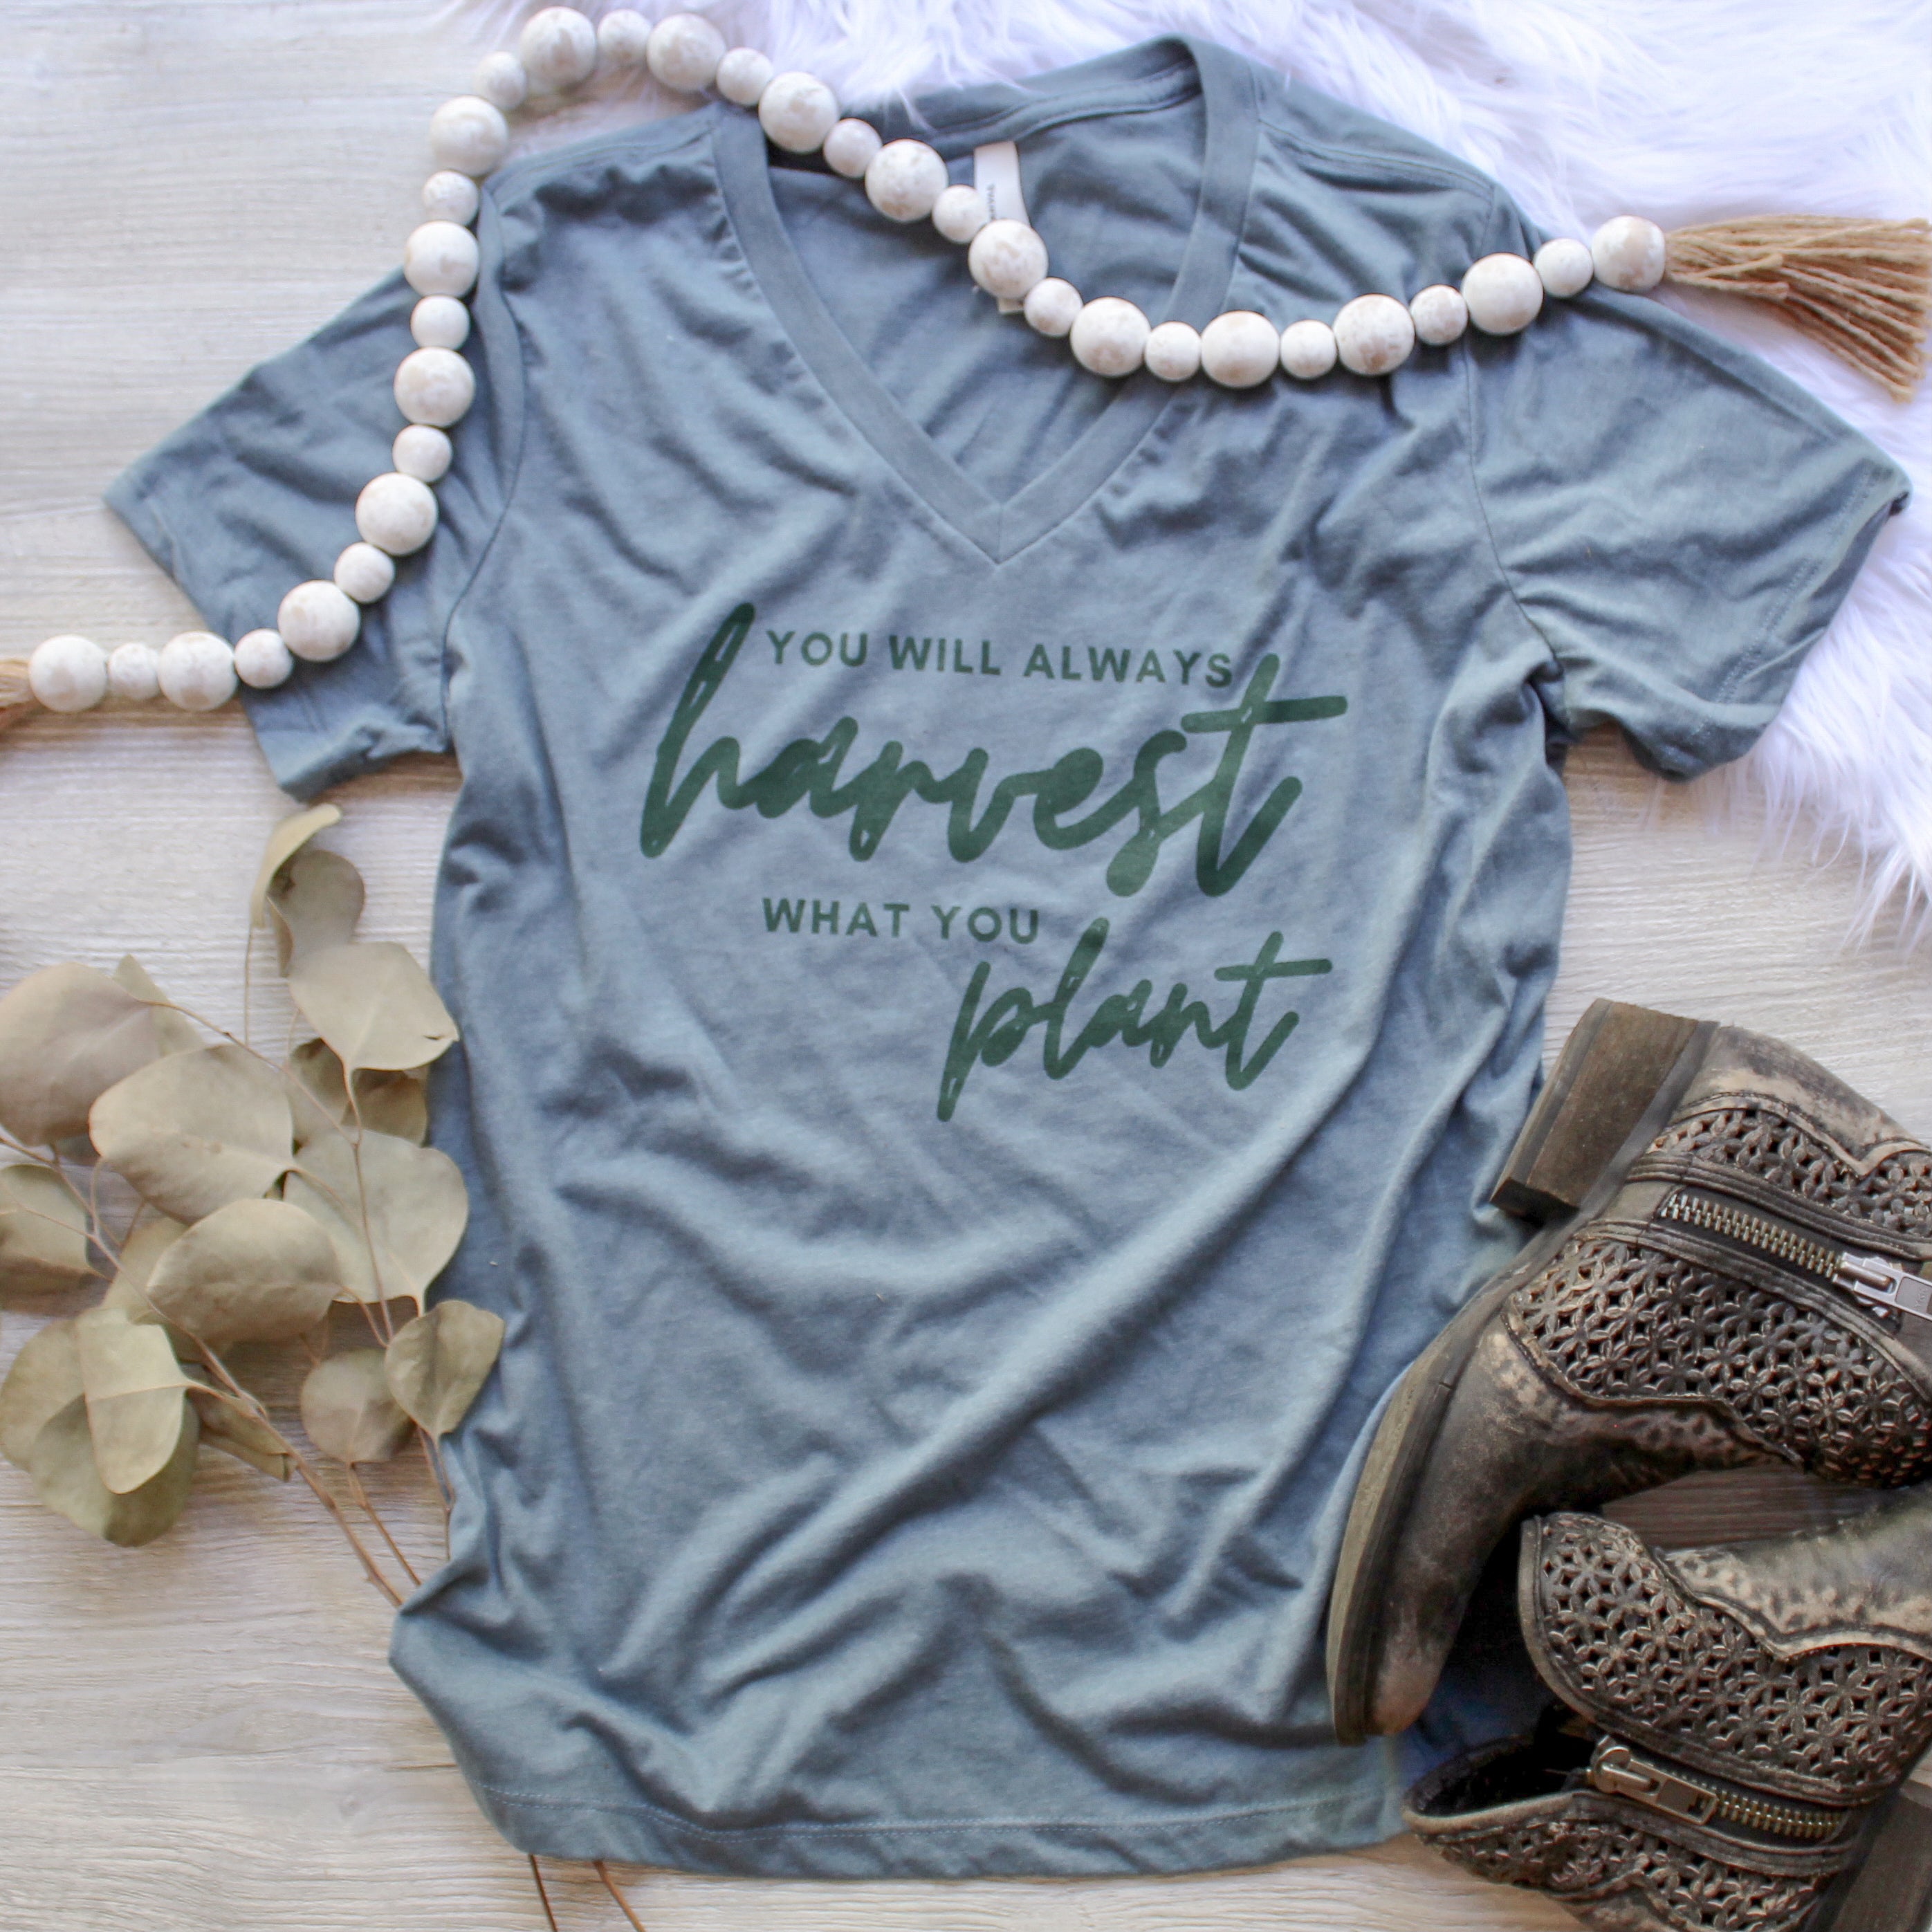 Teal vneck tshirt that says you will always harvest what you plant on it.